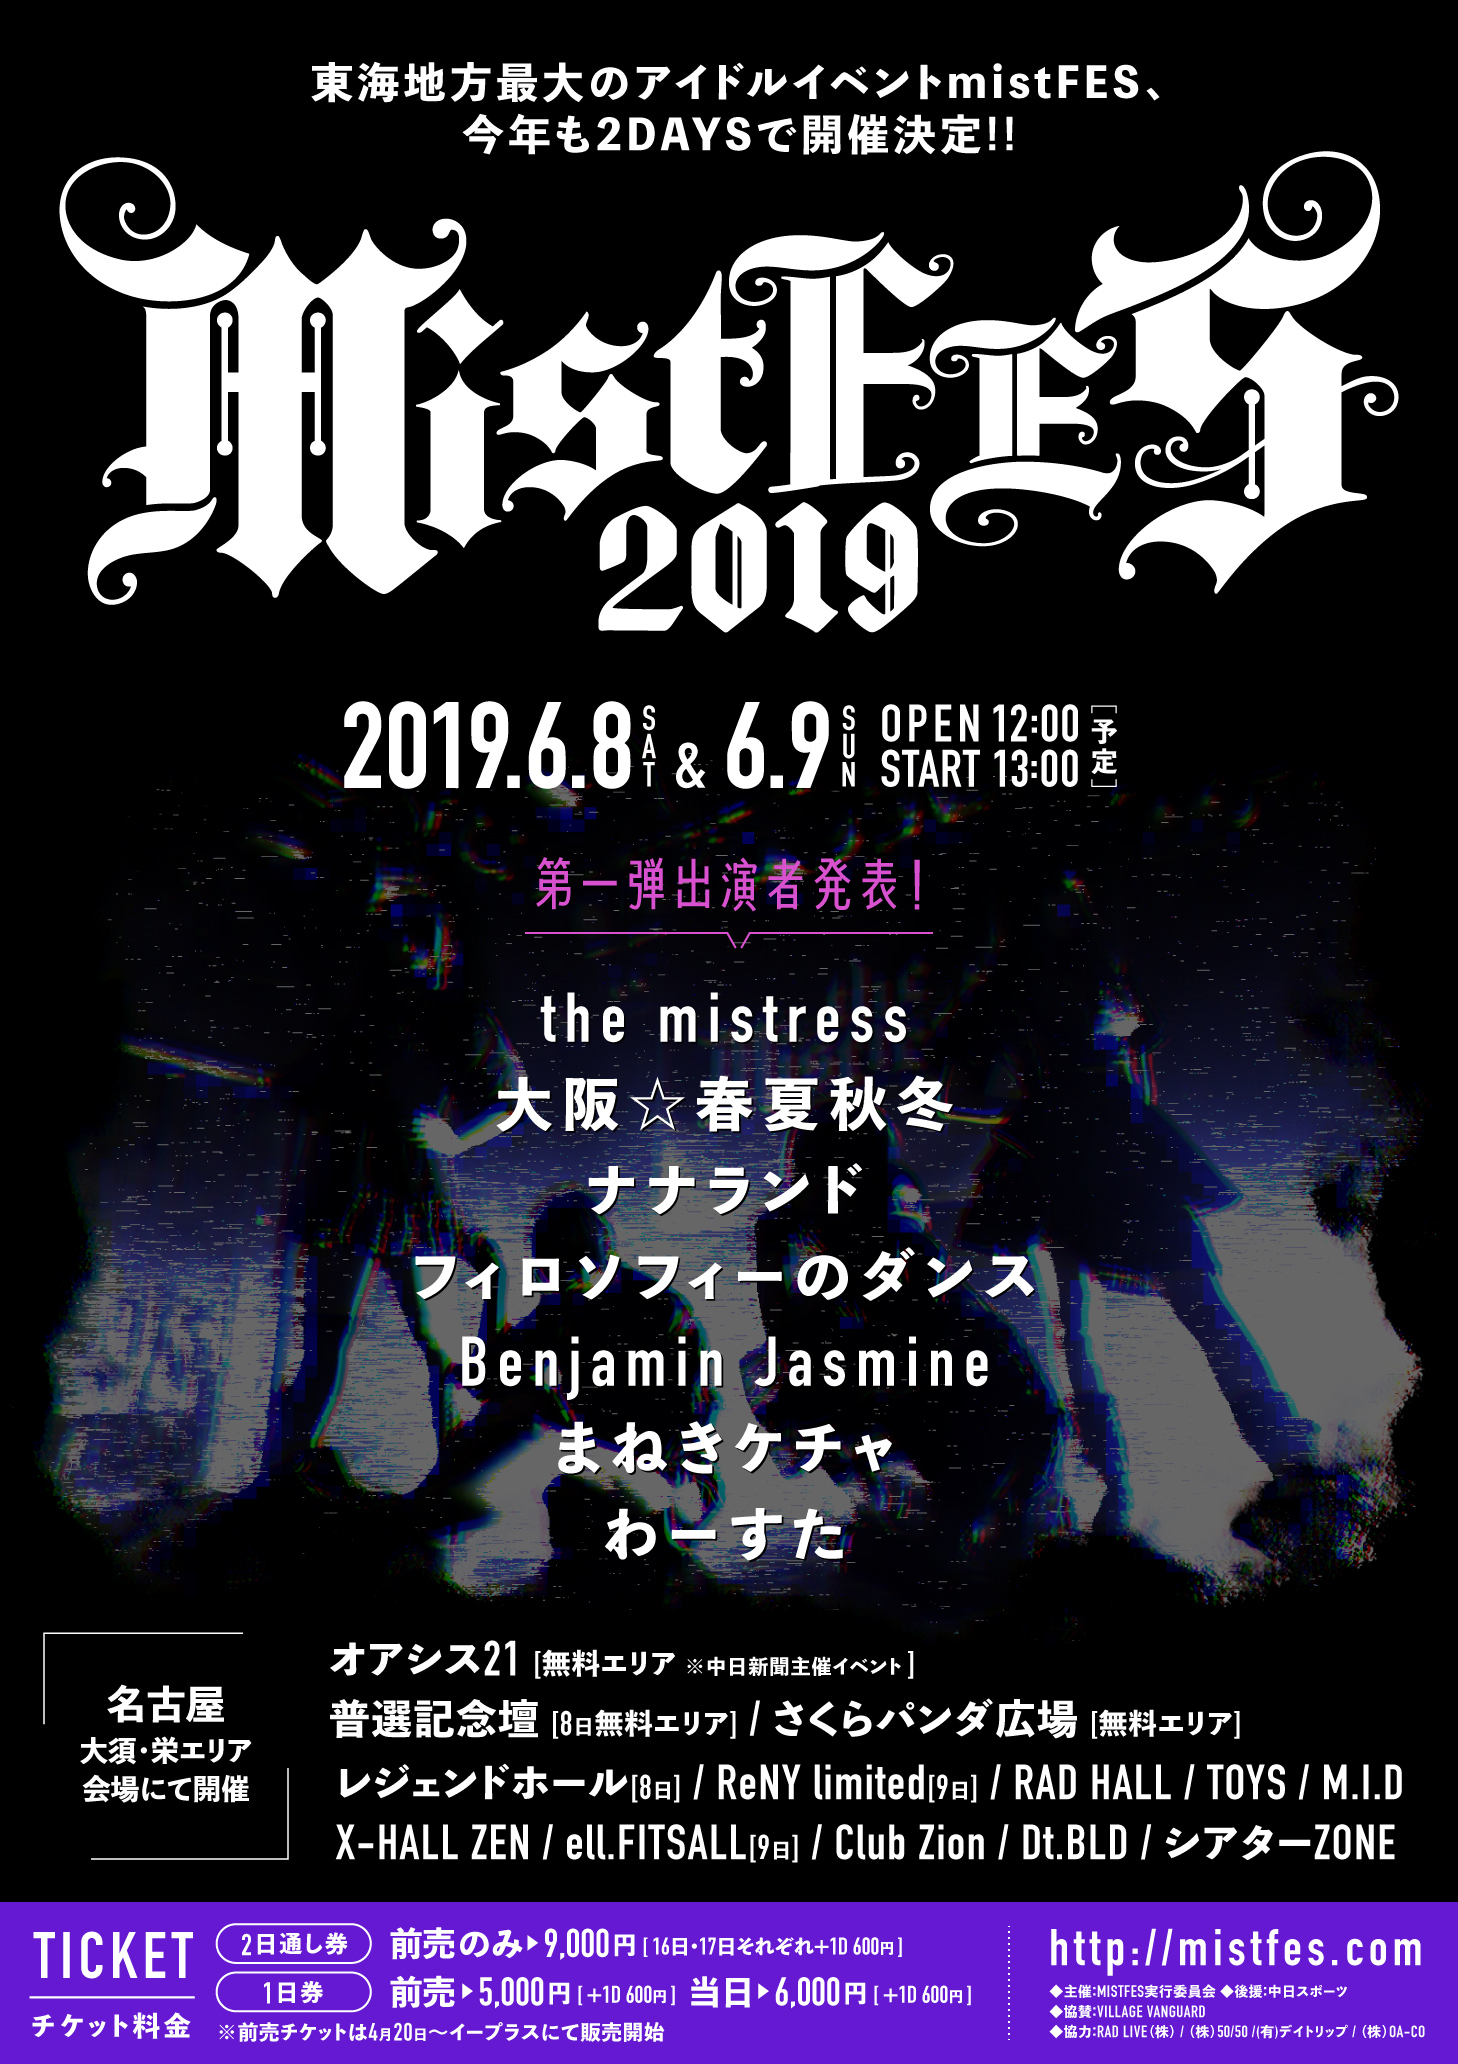 【mistFES2019 supported by 中日スポーツ】